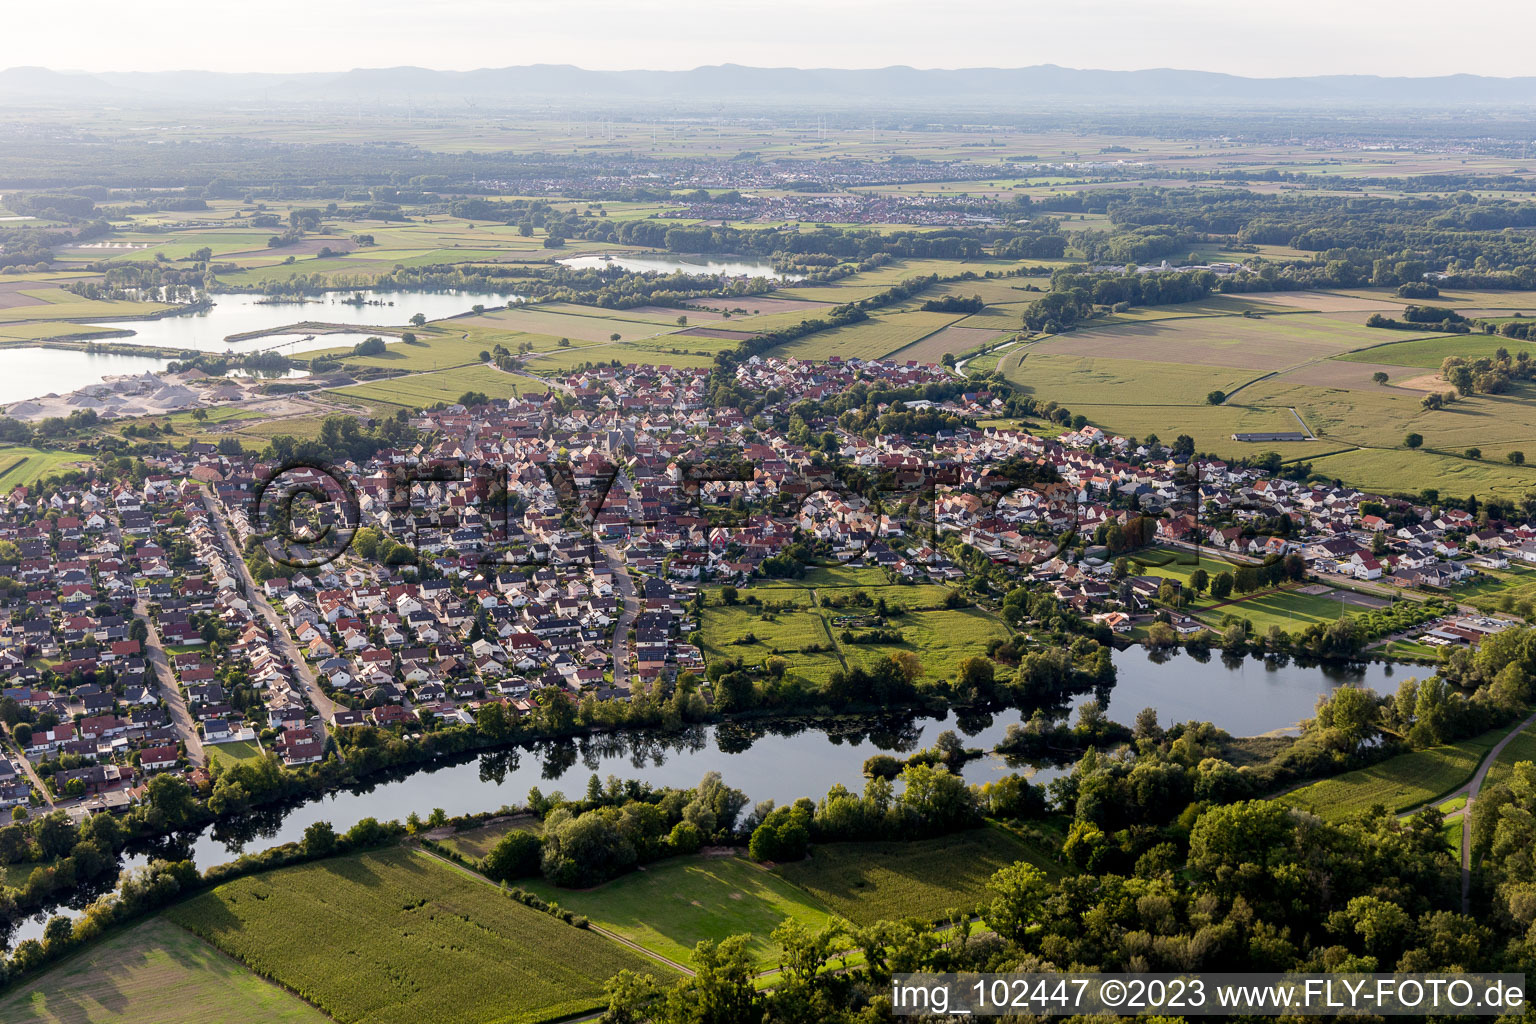 Leimersheim in the state Rhineland-Palatinate, Germany seen from above